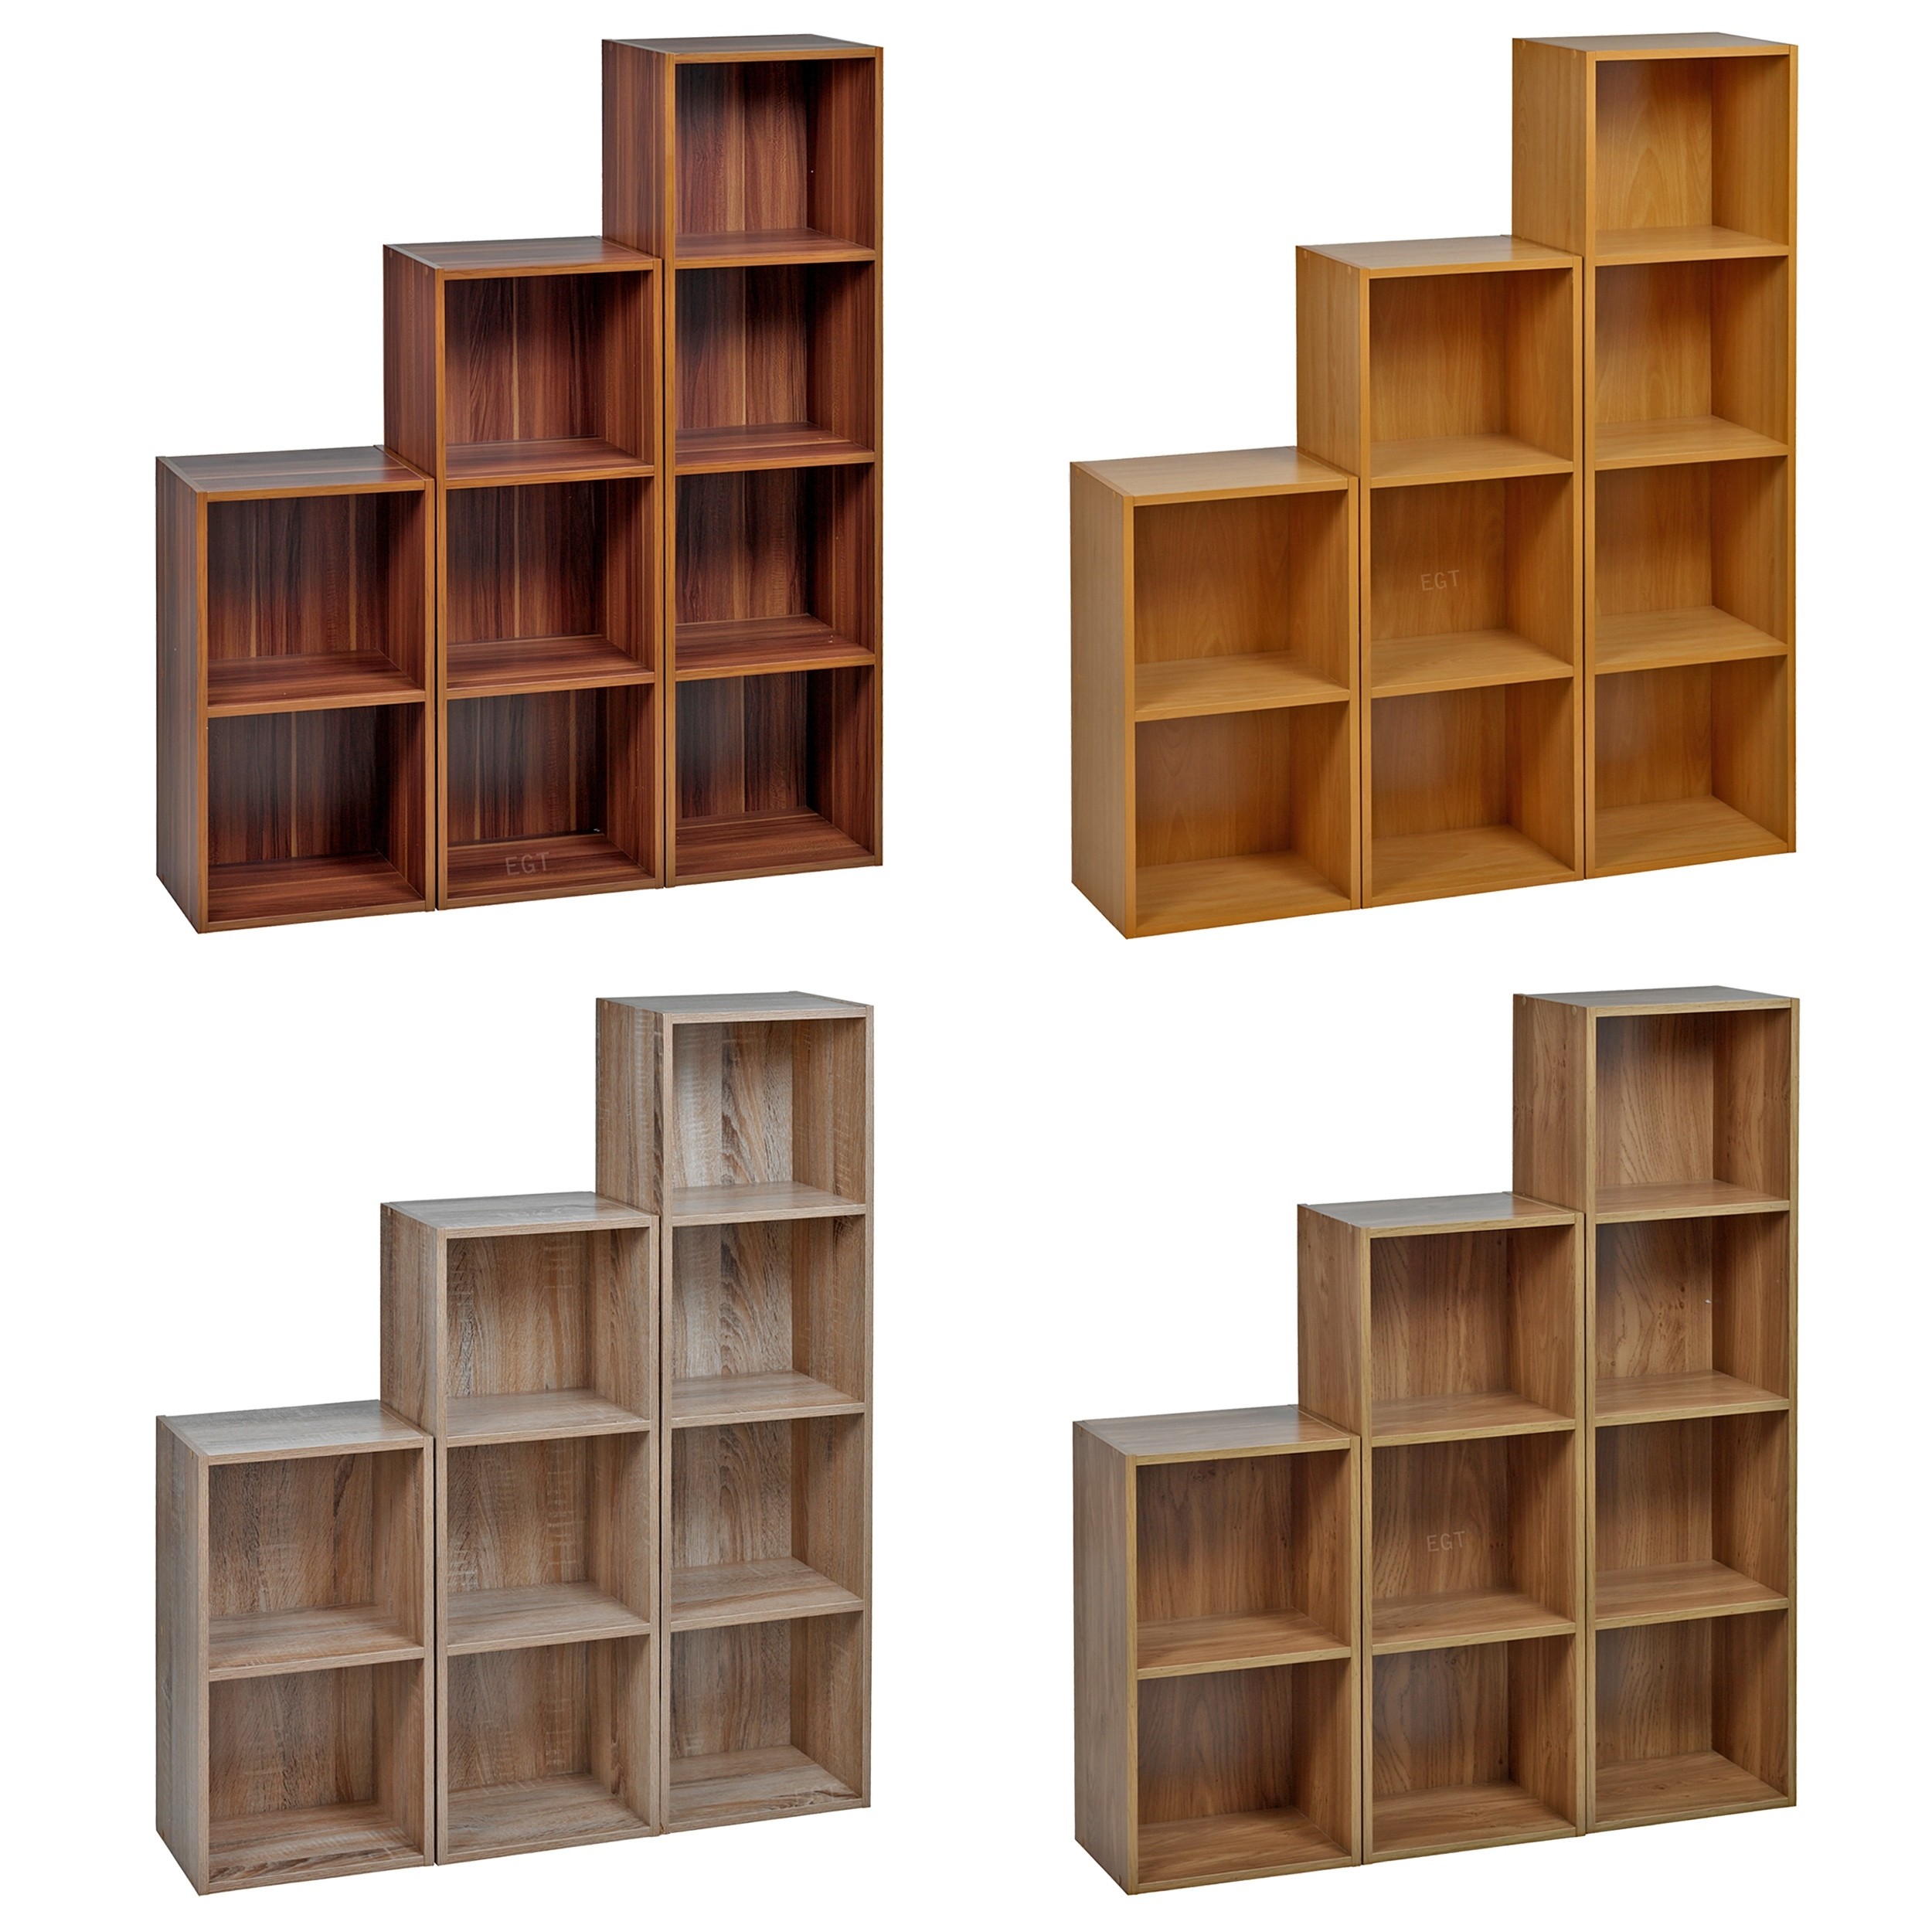 Easily assembled wooden cube bookcase shelves ideal for storage